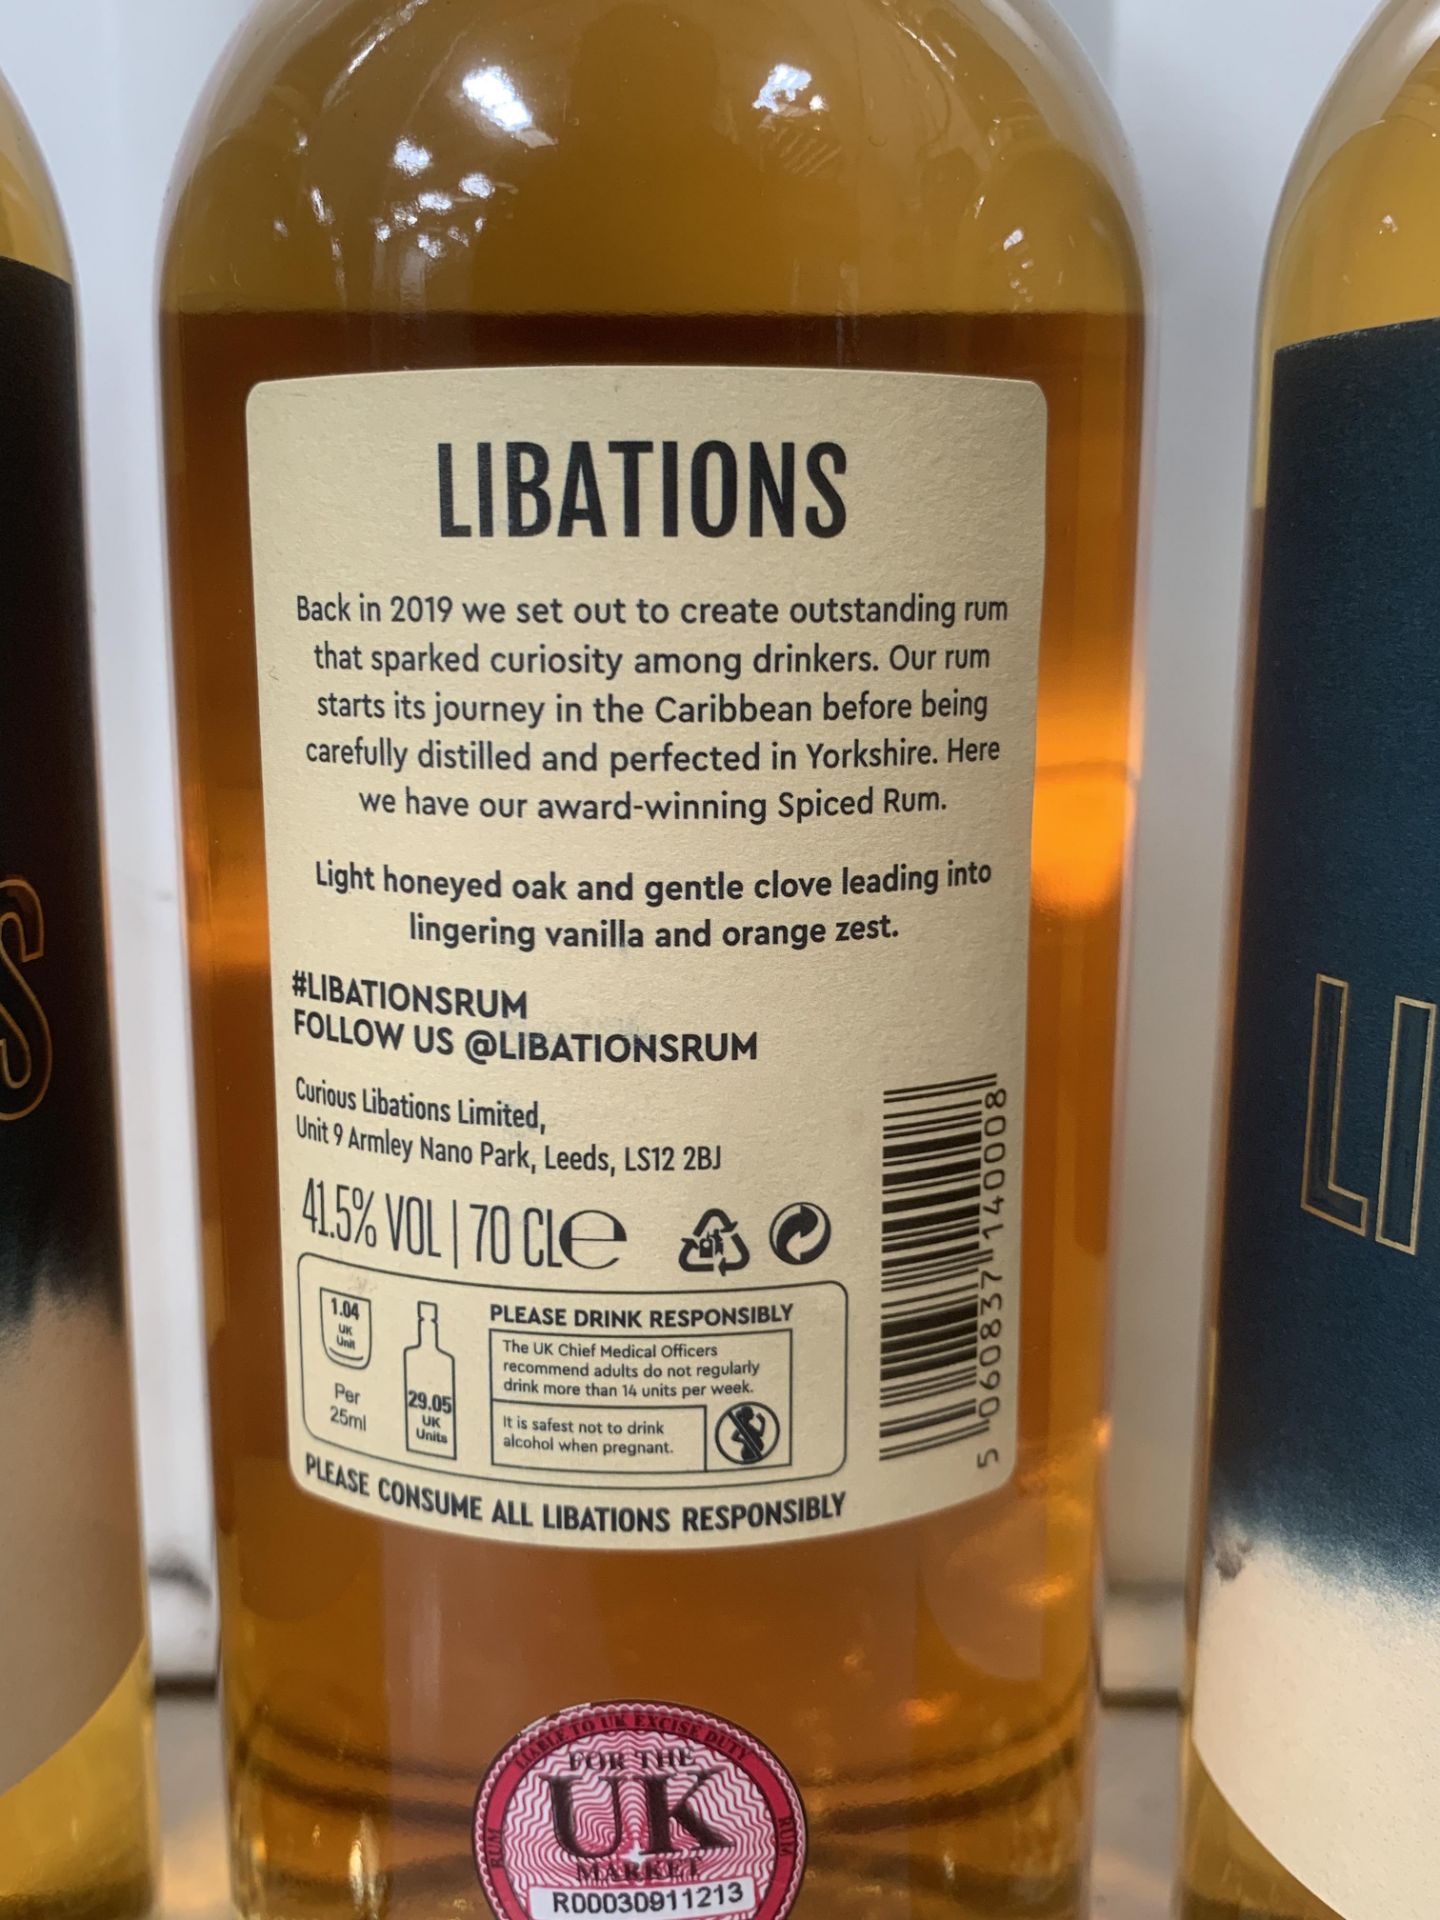 3x Bottles of Libations Single Origin Spiced Rum 41.5%, 70cl - Image 2 of 3